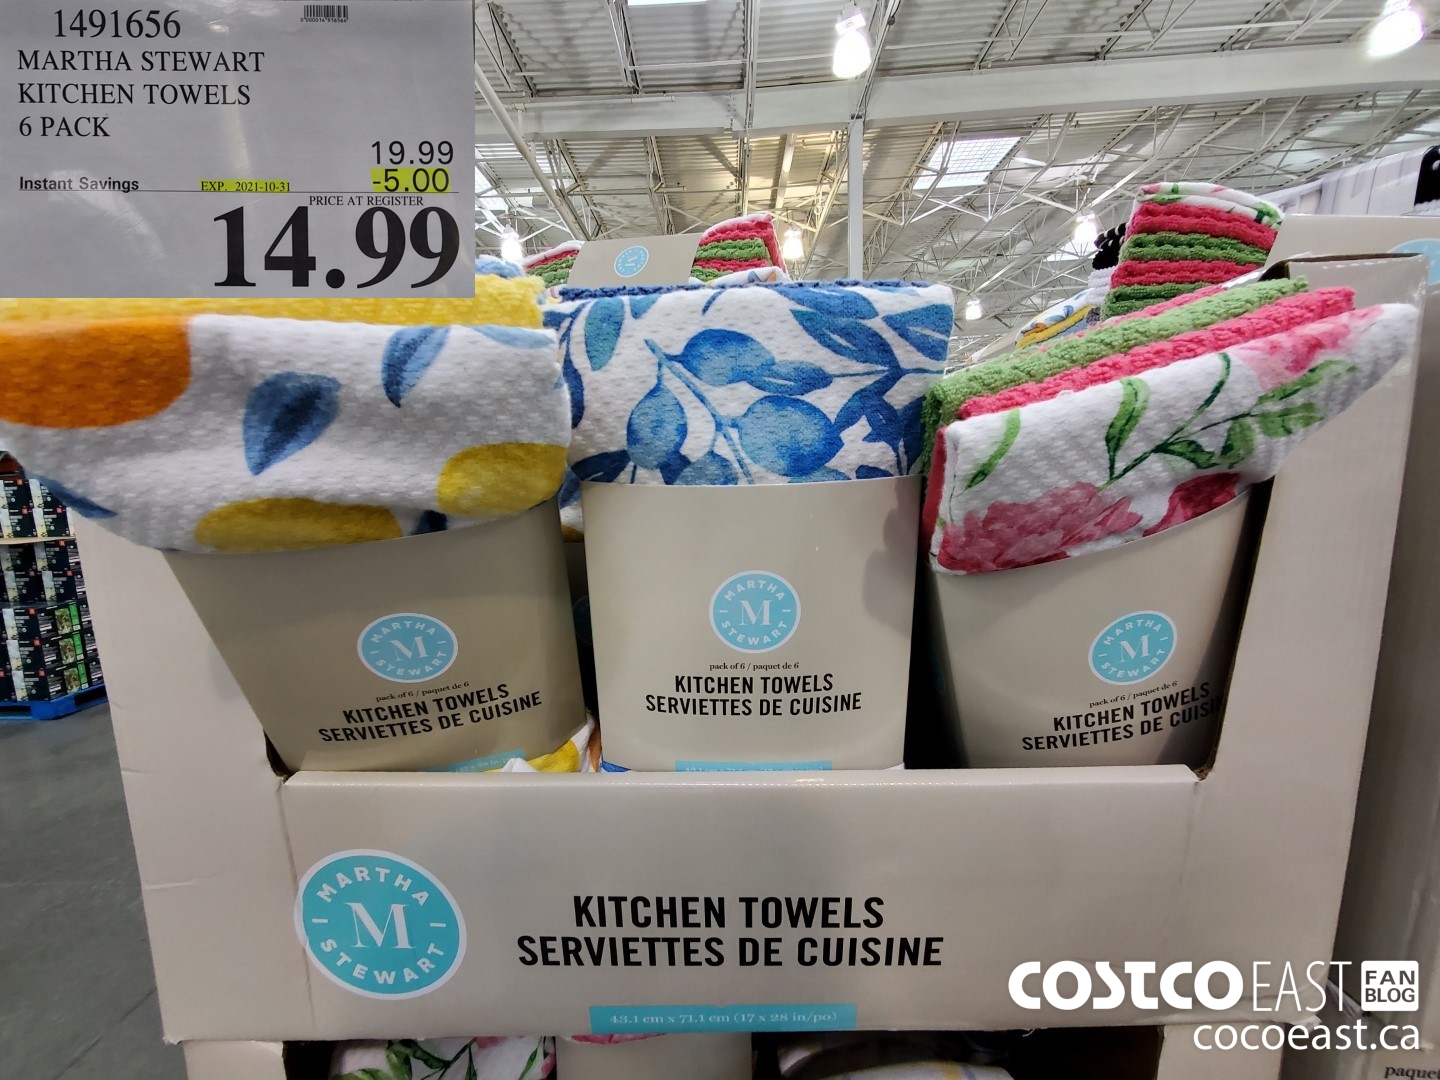 149656 MARTHA STEWART KITCHEN TOWELS 6 PACK 5 00 INSTANT SAVINGS EXPIRES ON  2021 10 31 14 99 - Costco East Fan Blog